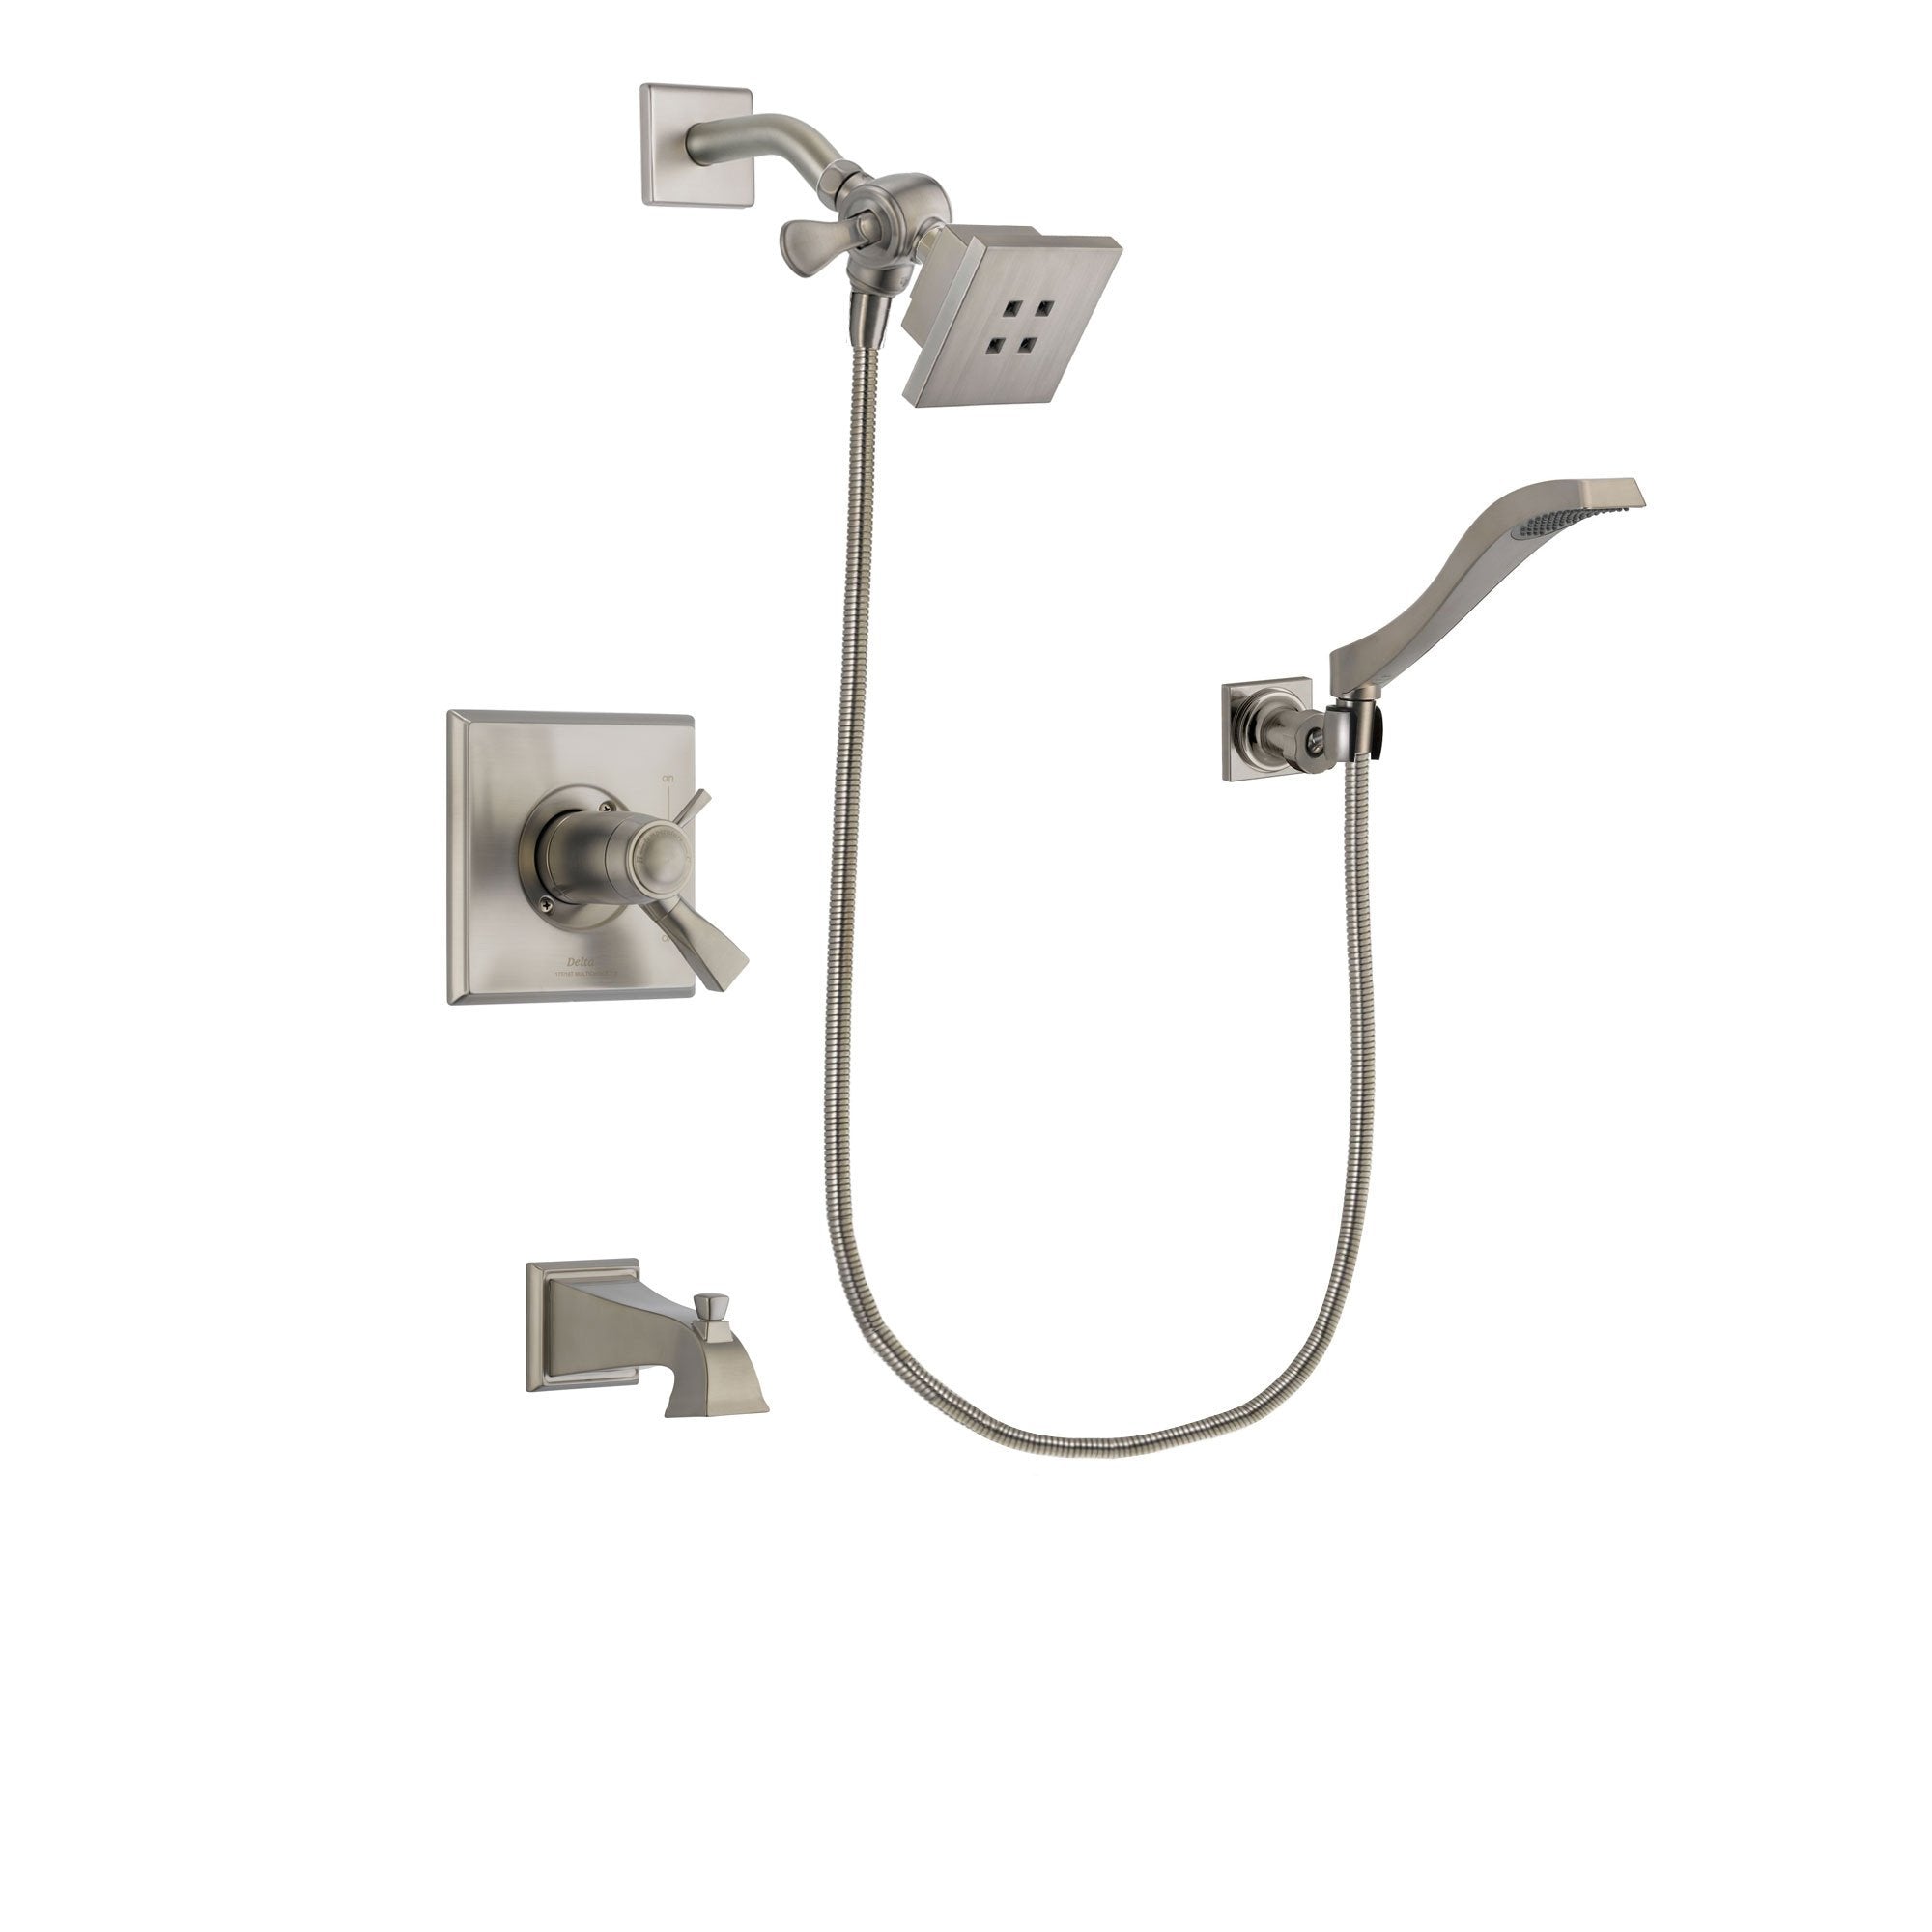 Delta Dryden Stainless Steel Finish Thermostatic Tub and Shower Faucet System Package with Square Showerhead and Modern Wall Mount Handheld Shower Spray Includes Rough-in Valve and Tub Spout DSP2057V